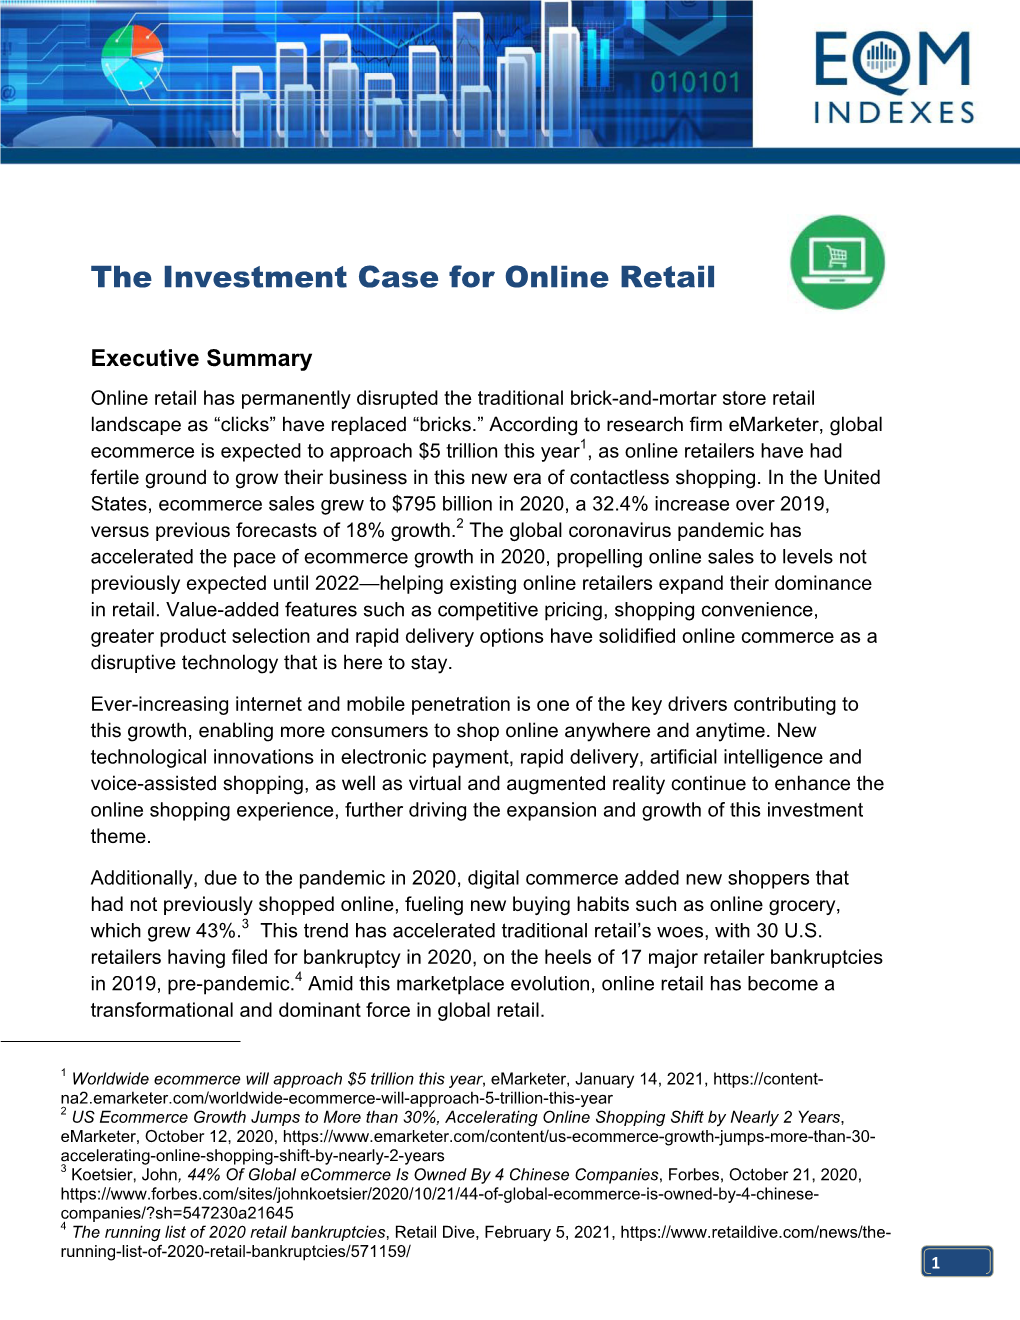 The Investment Case for Online Retail